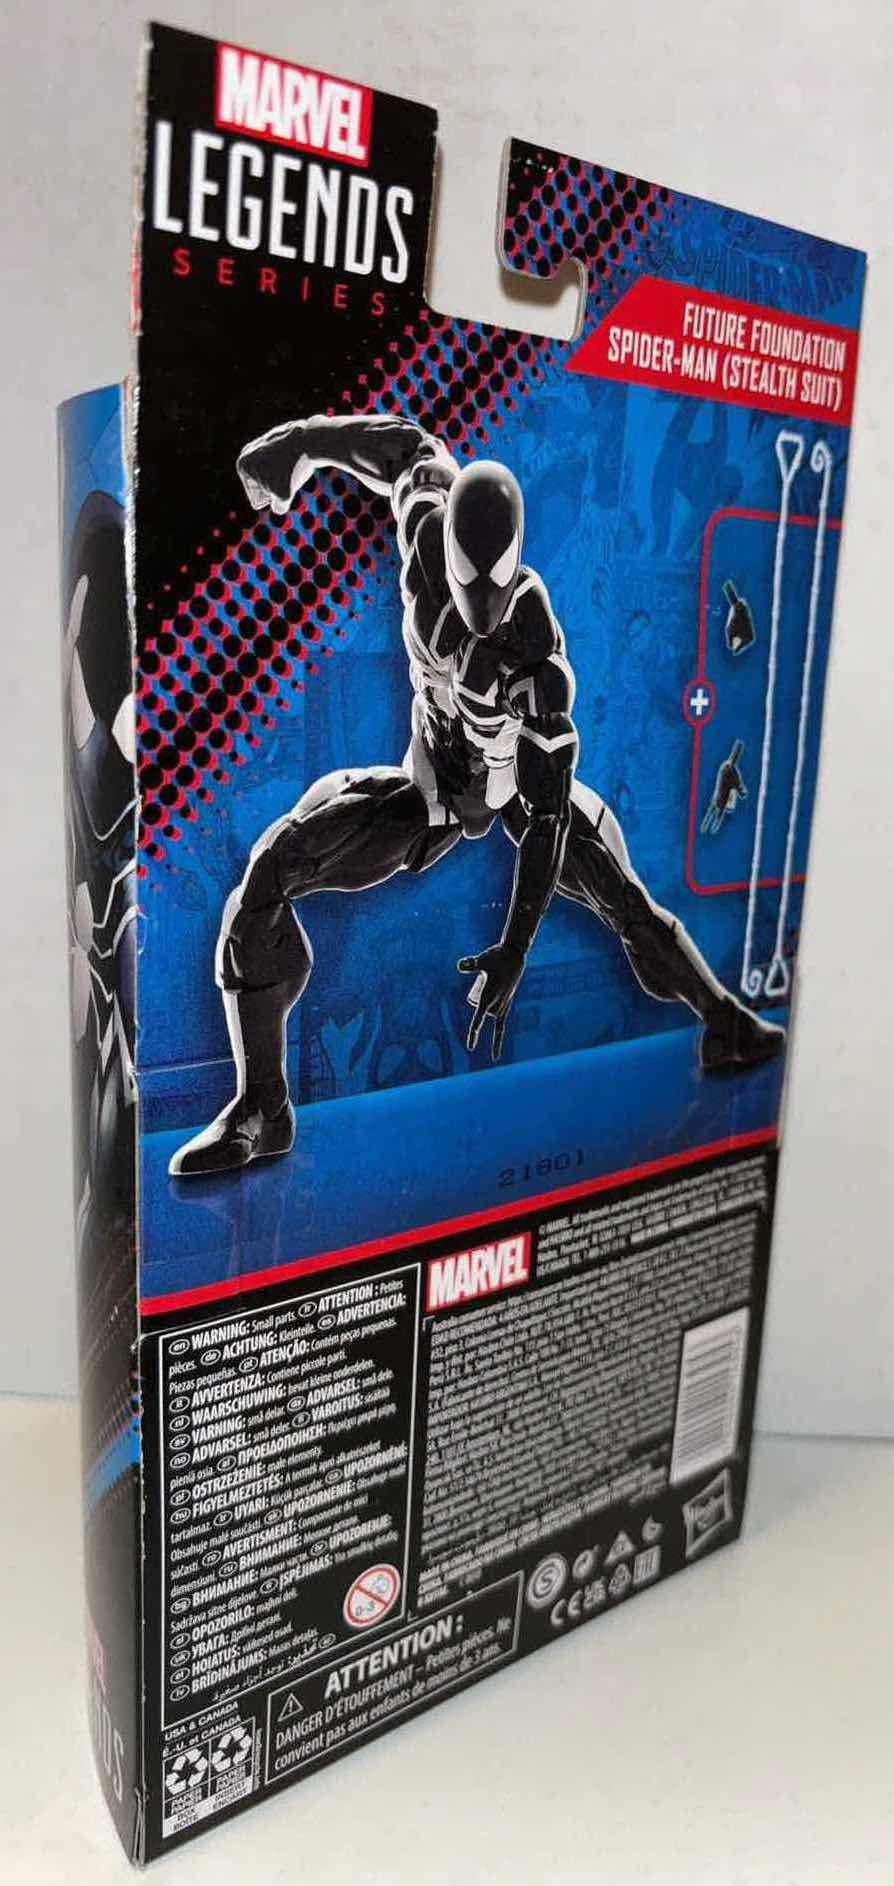 Photo 3 of NEW HASBRO MARVEL LEGENDS SERIES SPIDER-MAN 60 AMAZING YEARS ACTION FIGURE & ACCESSORIES, “FUTURE FOUNDATION SPIDER-MAN (STEALTH SUIT)”